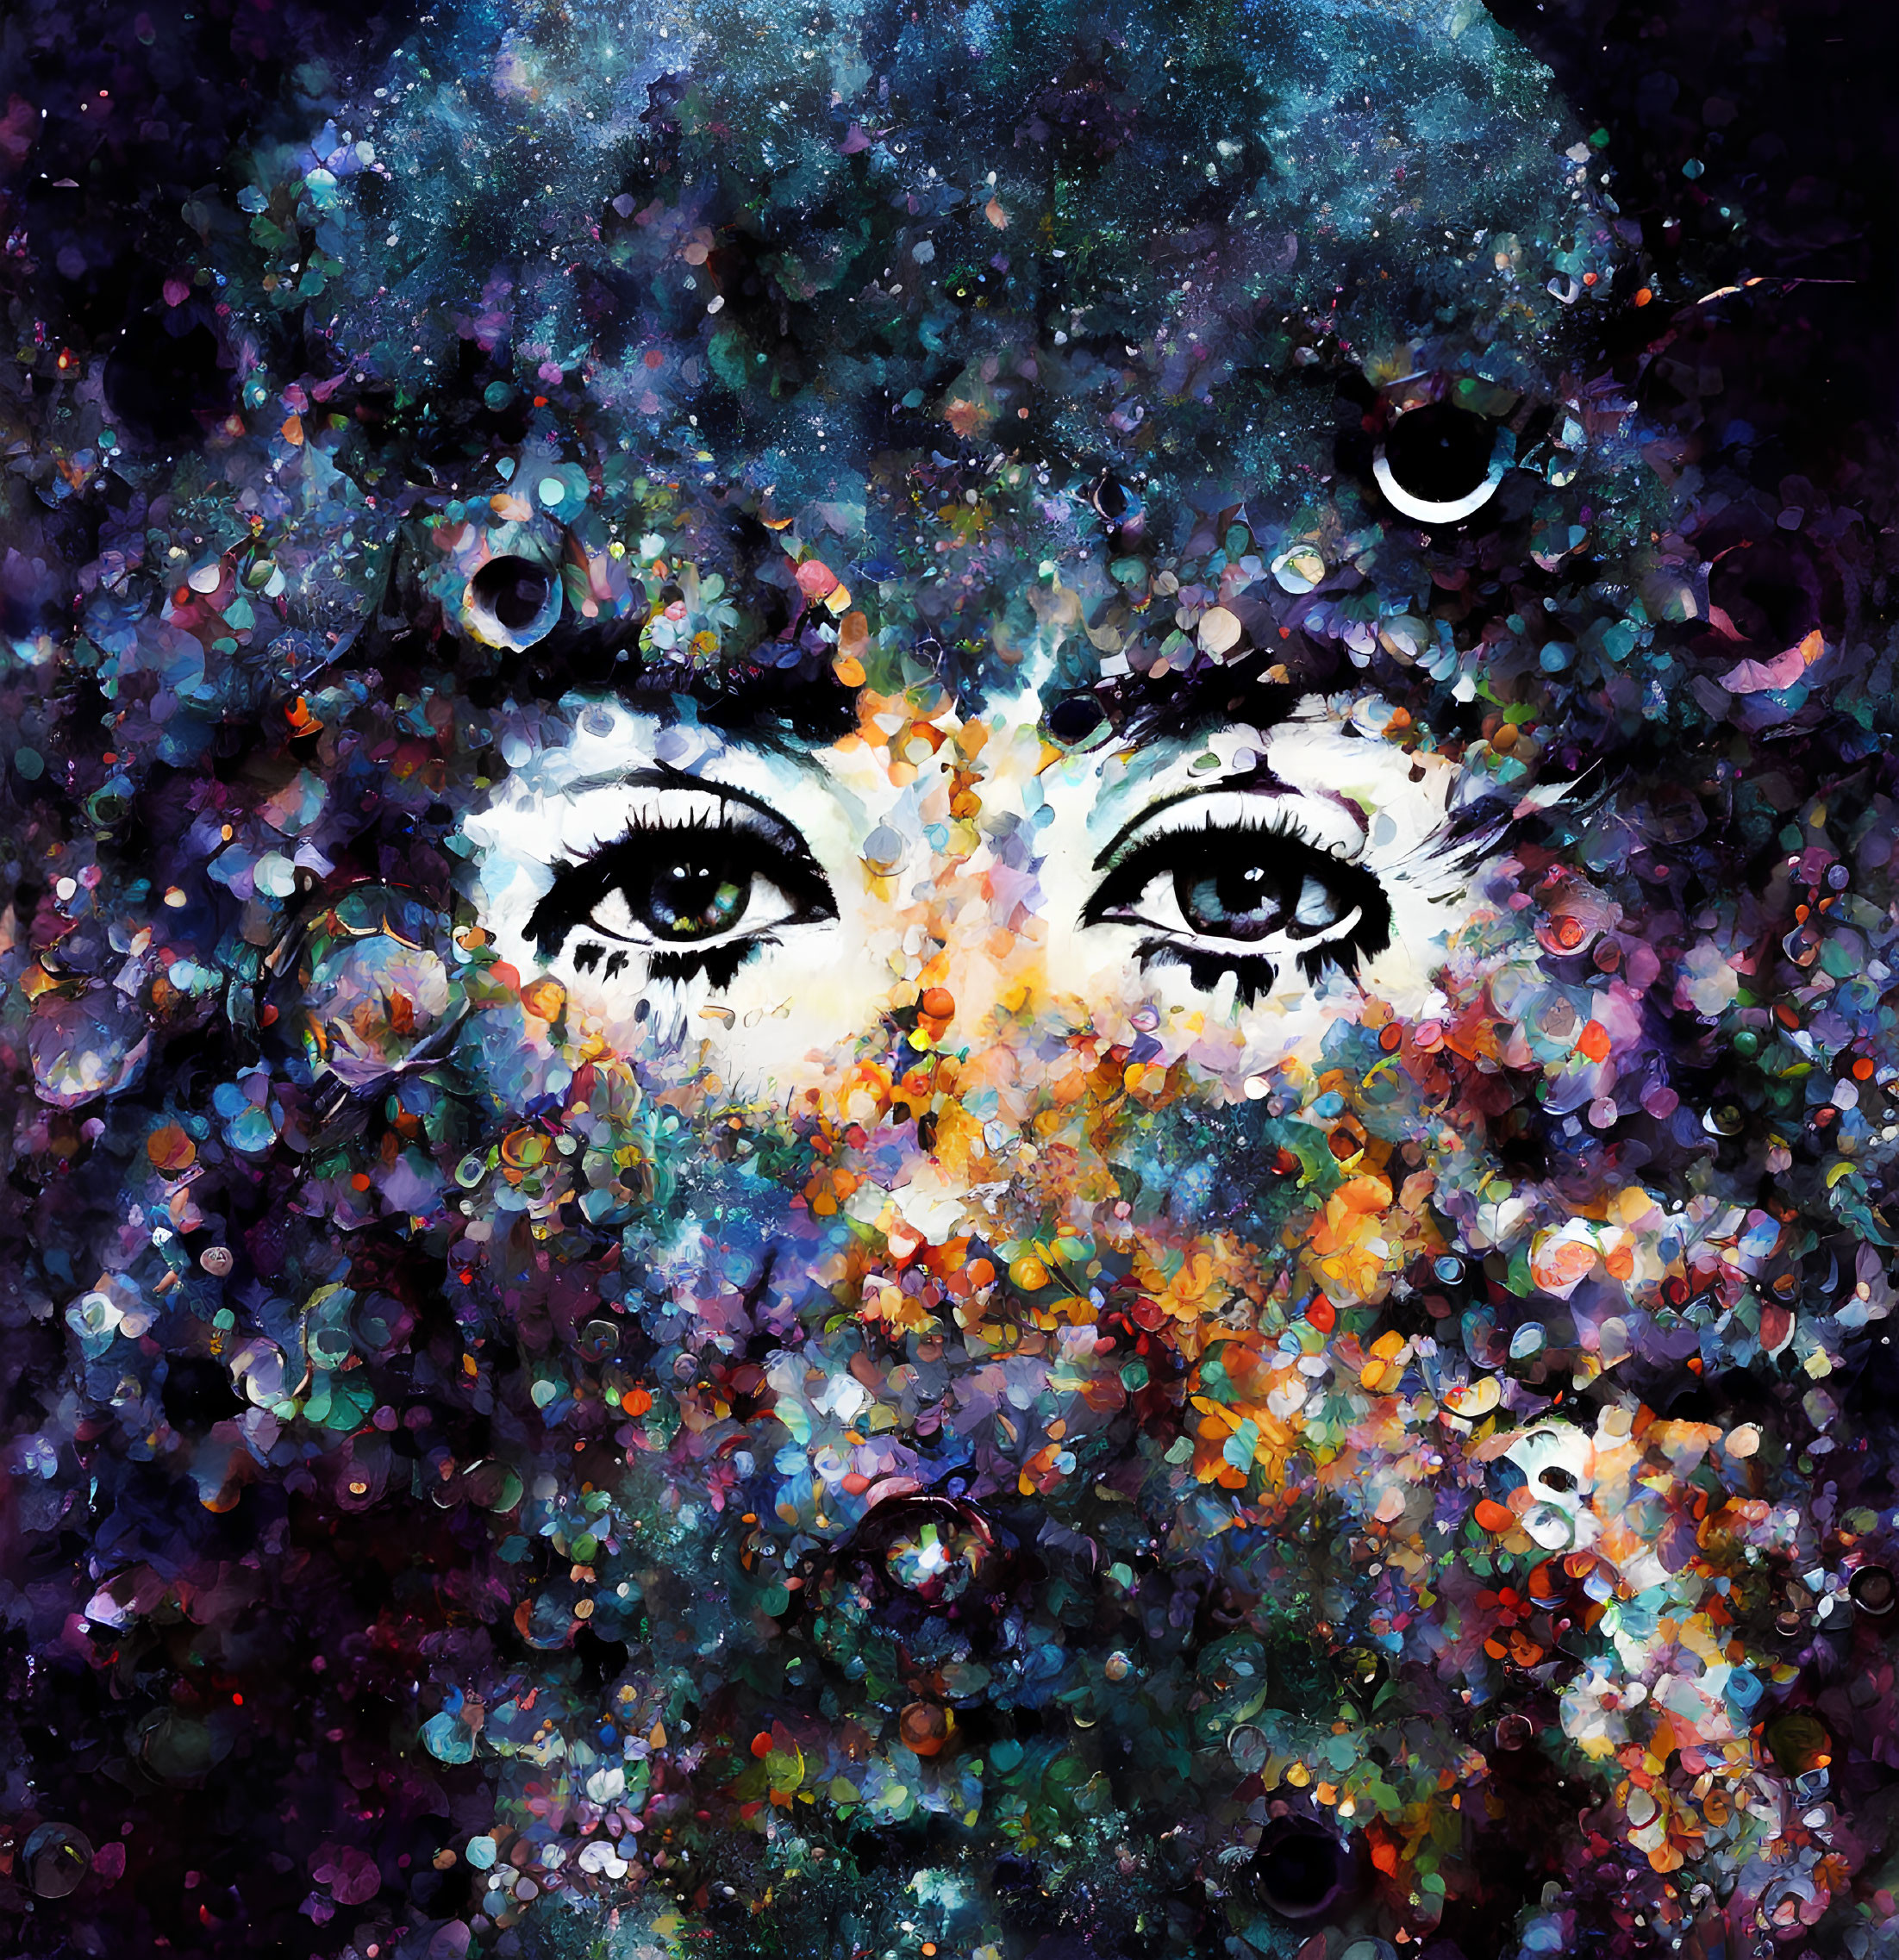 Colorful cosmic portrait of a woman with striking eyes in vibrant circles.